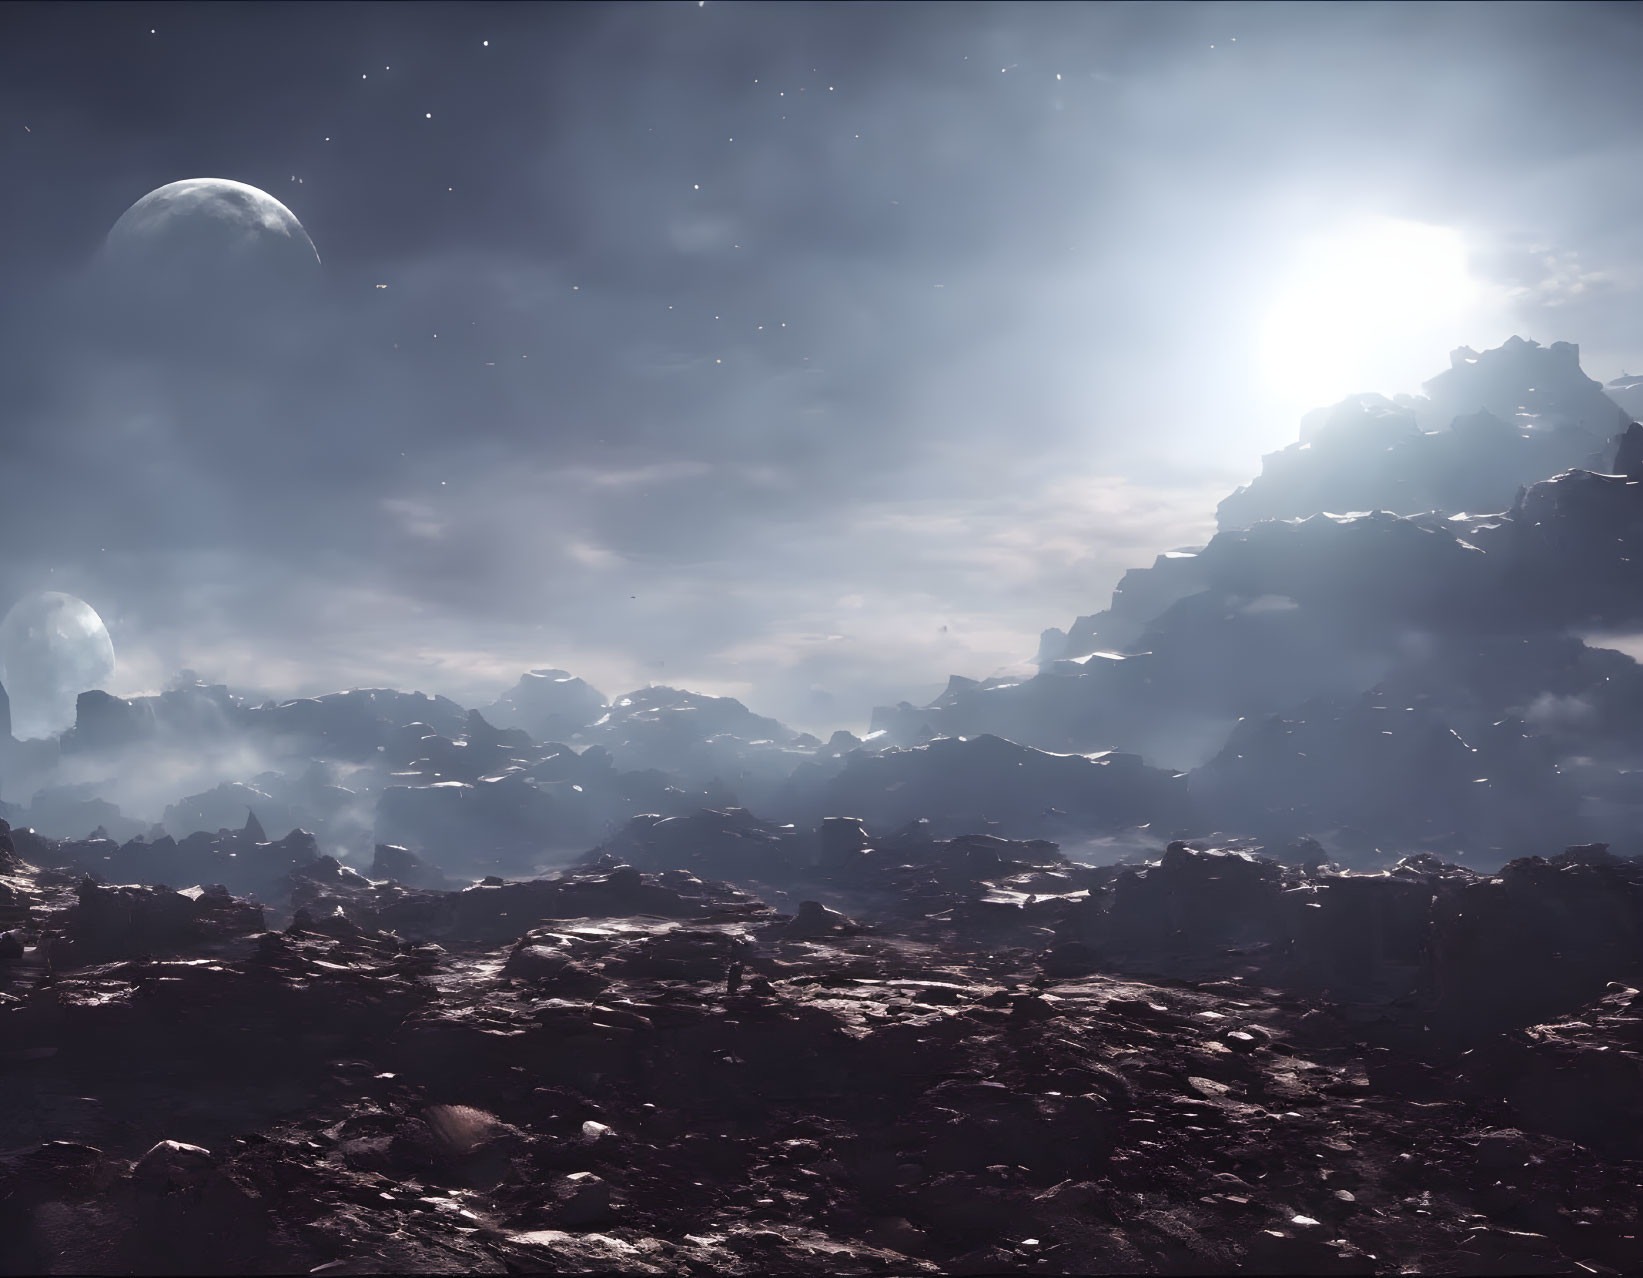 Alien landscape with rocky terrain, starry sky, sunlight, and dual moons.